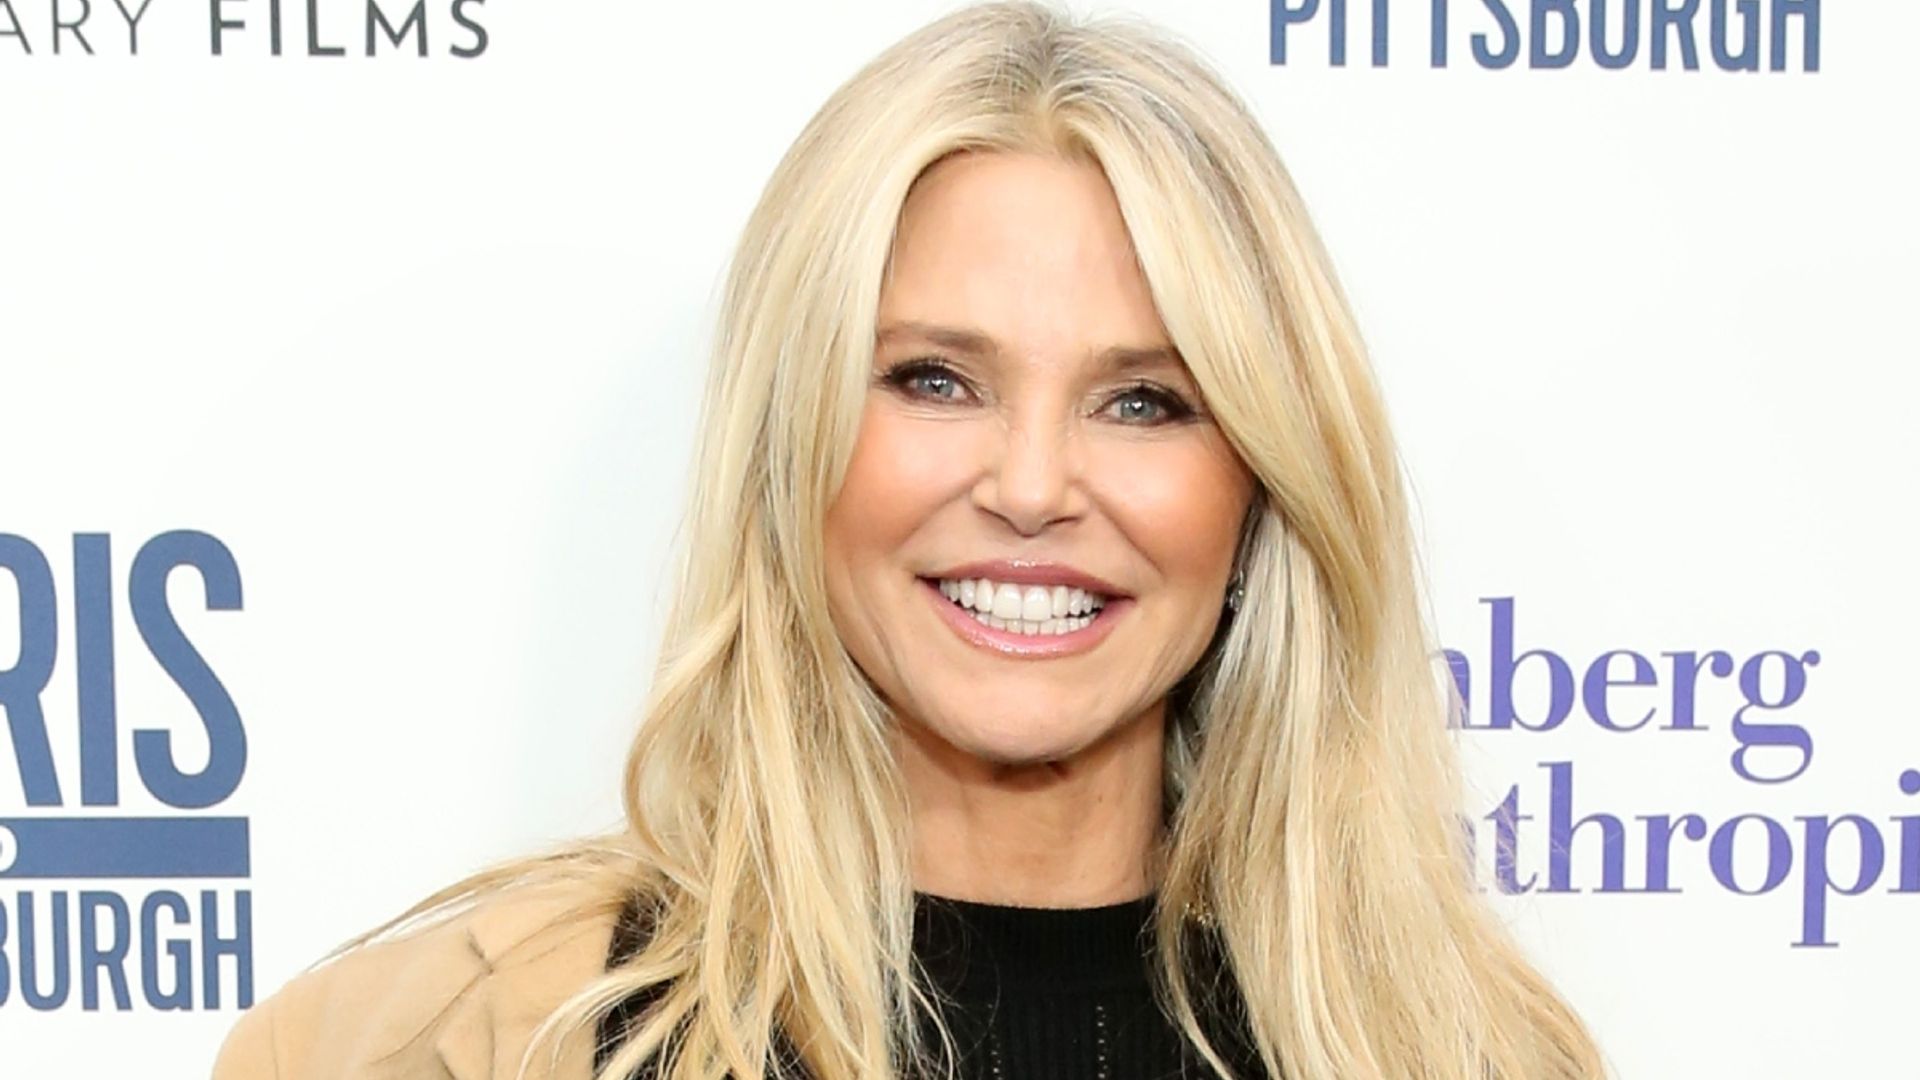 Christie Brinkley 68 Shows Off Supremely Toned Figure In Plunging